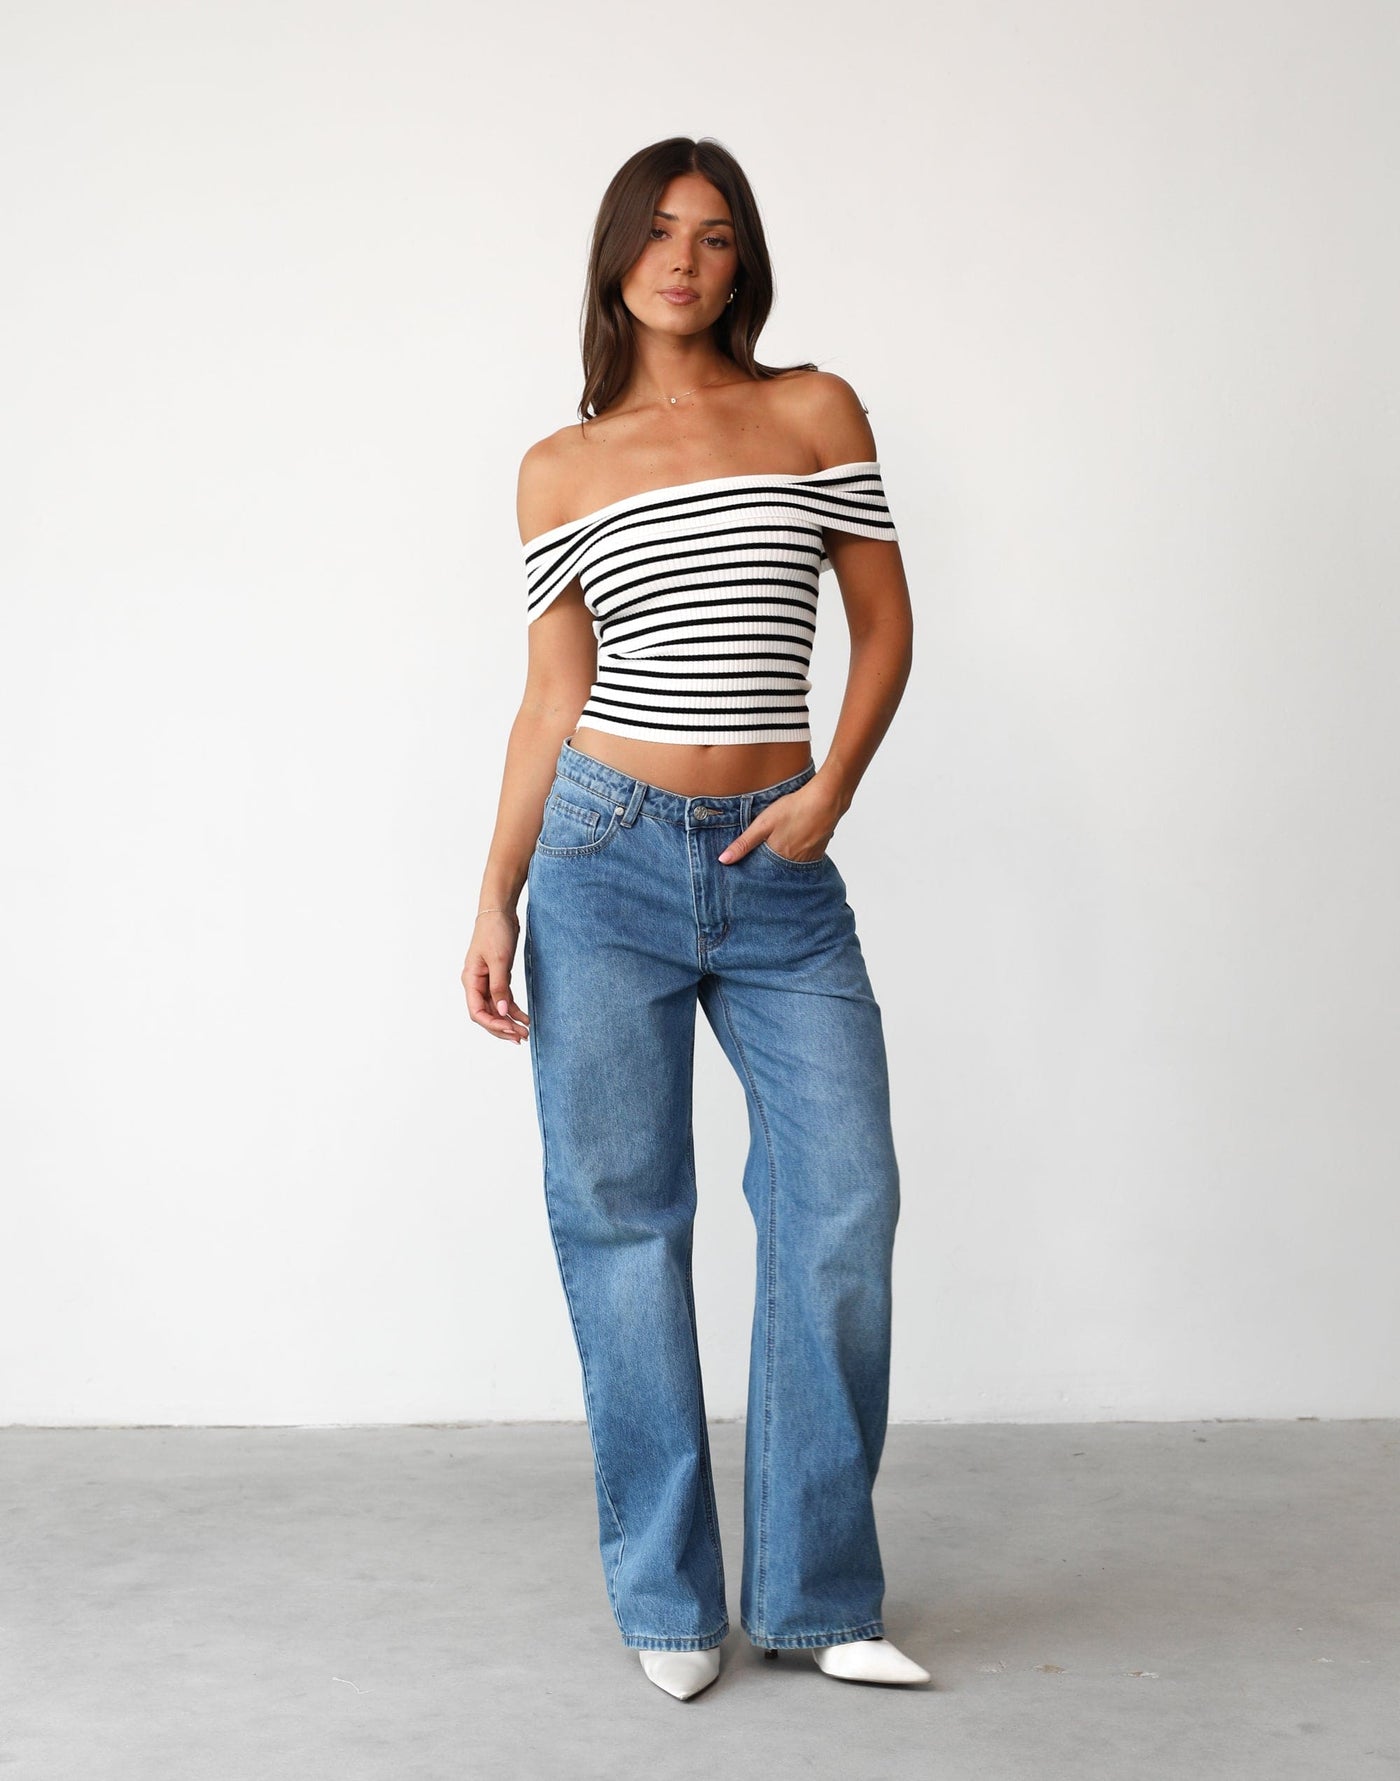 Elena Top (White/Black Stripe) | Charcoal Clothing Exclusive - Off-the-shoulder Fold Over Detail Knit Top - Women's Top - Charcoal Clothing